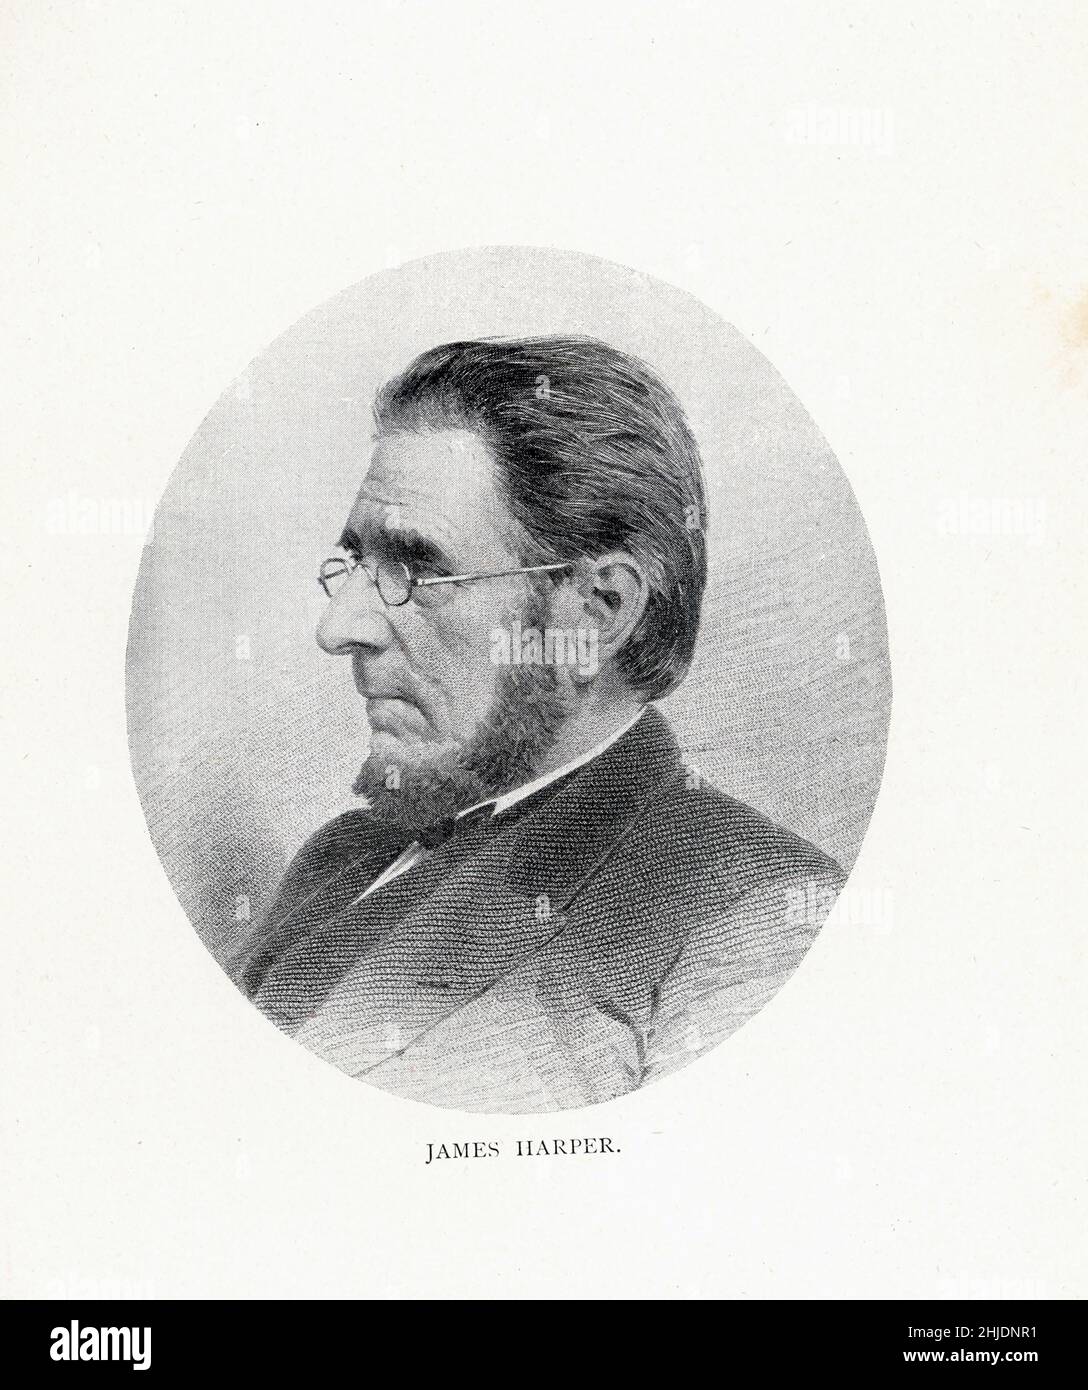 James Harper (1795 –1869), was an American publisher and politician in the early-to-mid 19th century. Stock Photo